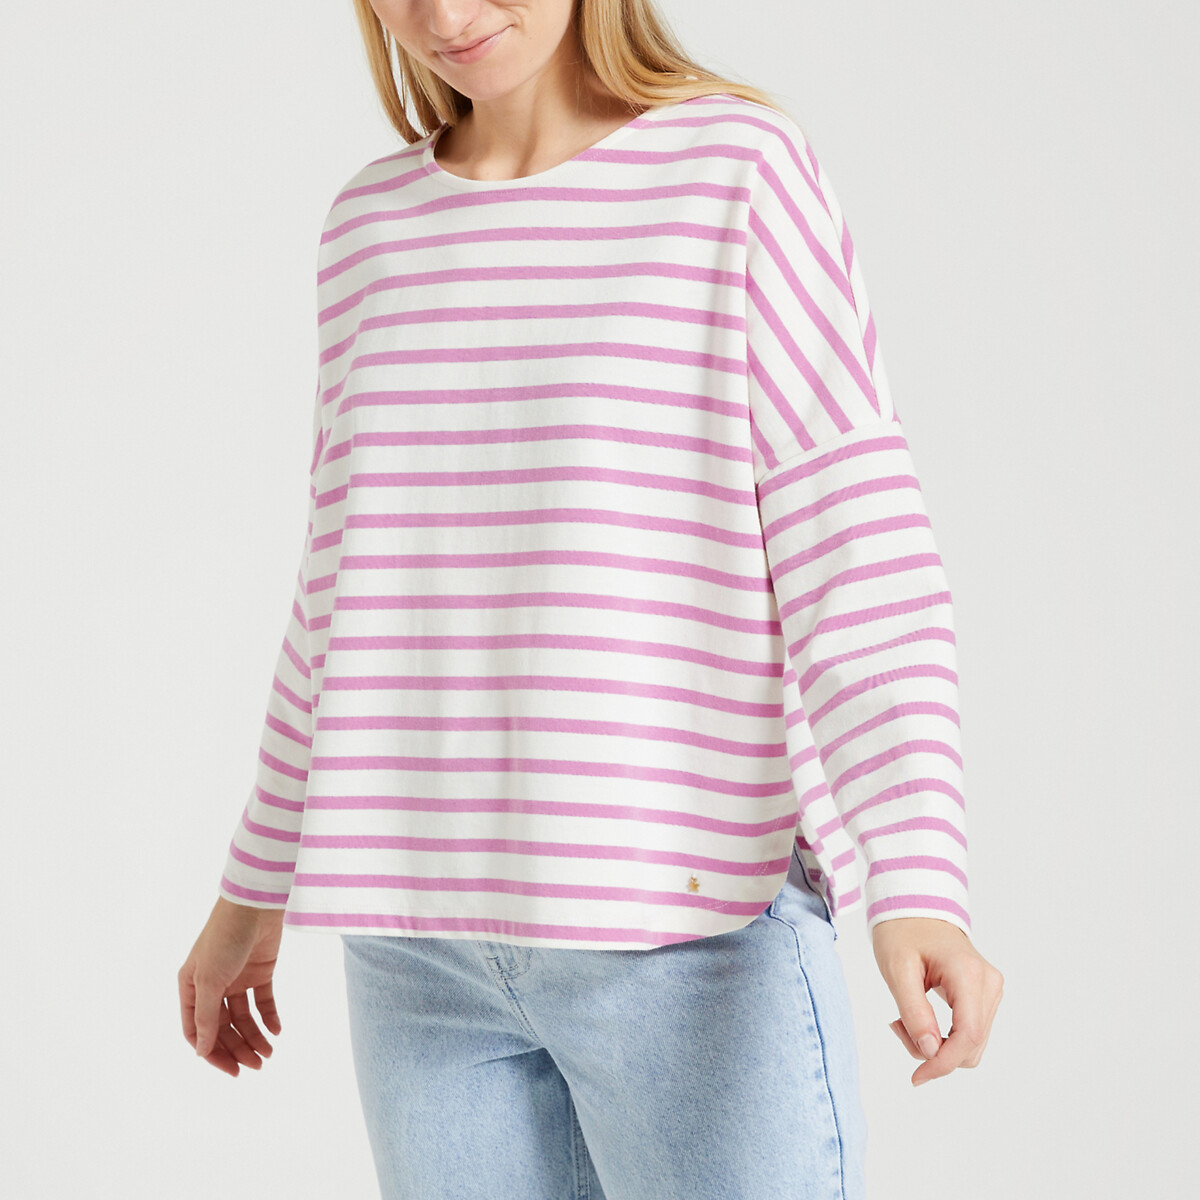 Image of Filly Ecru/Loukoum T-Shirt in Striped Cotton with Long Sleeves